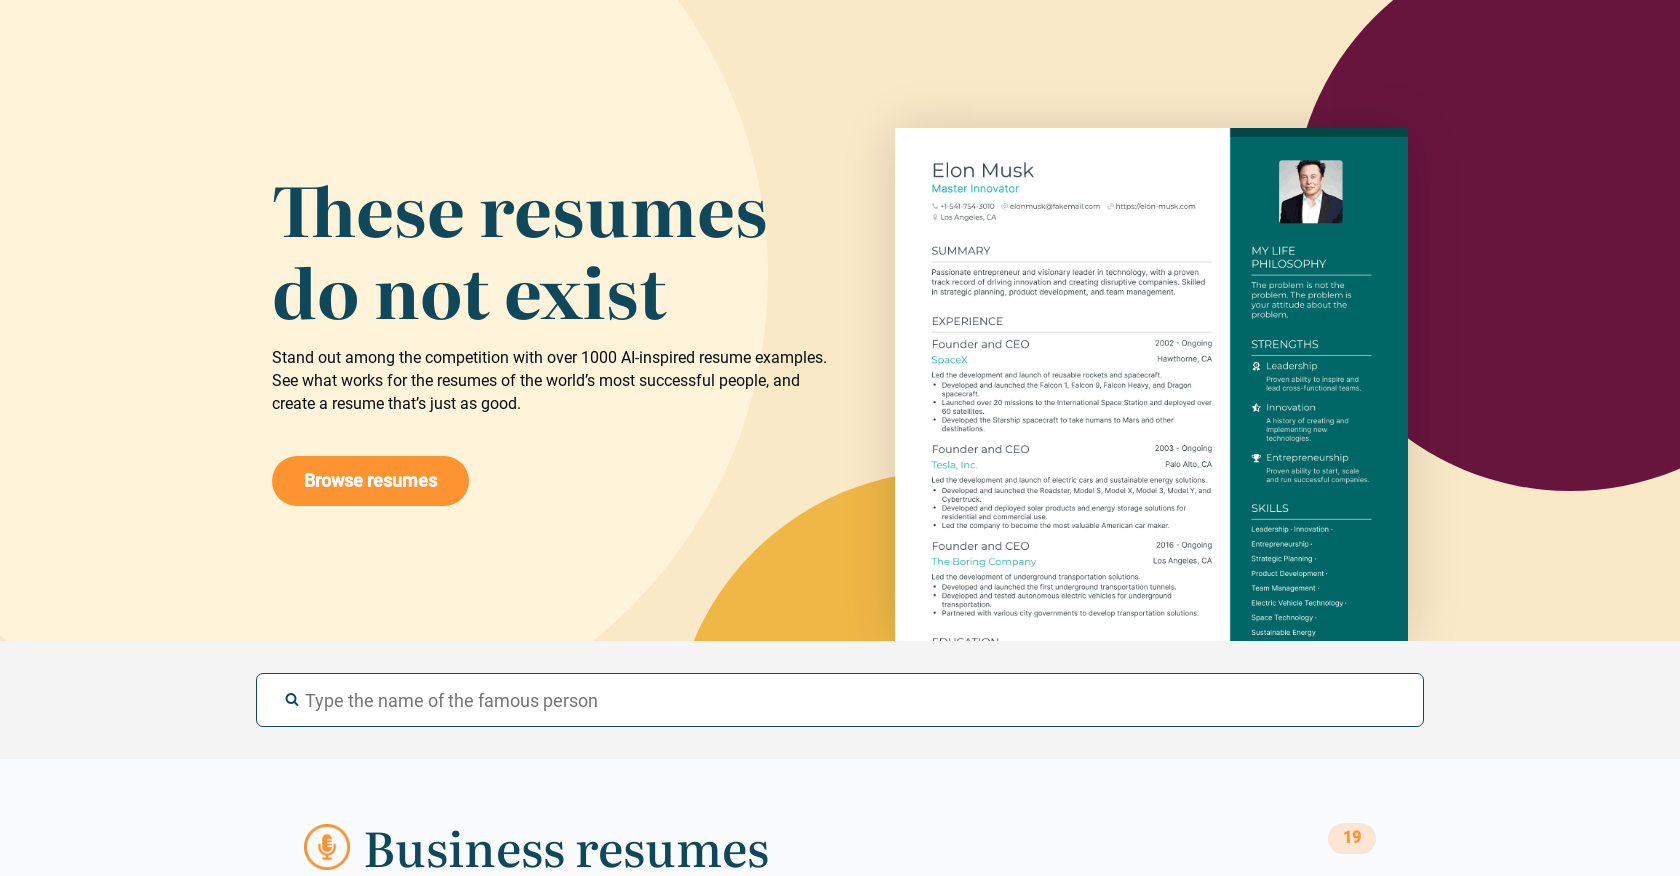 ThemotherAI - This Resume Does Not Exist